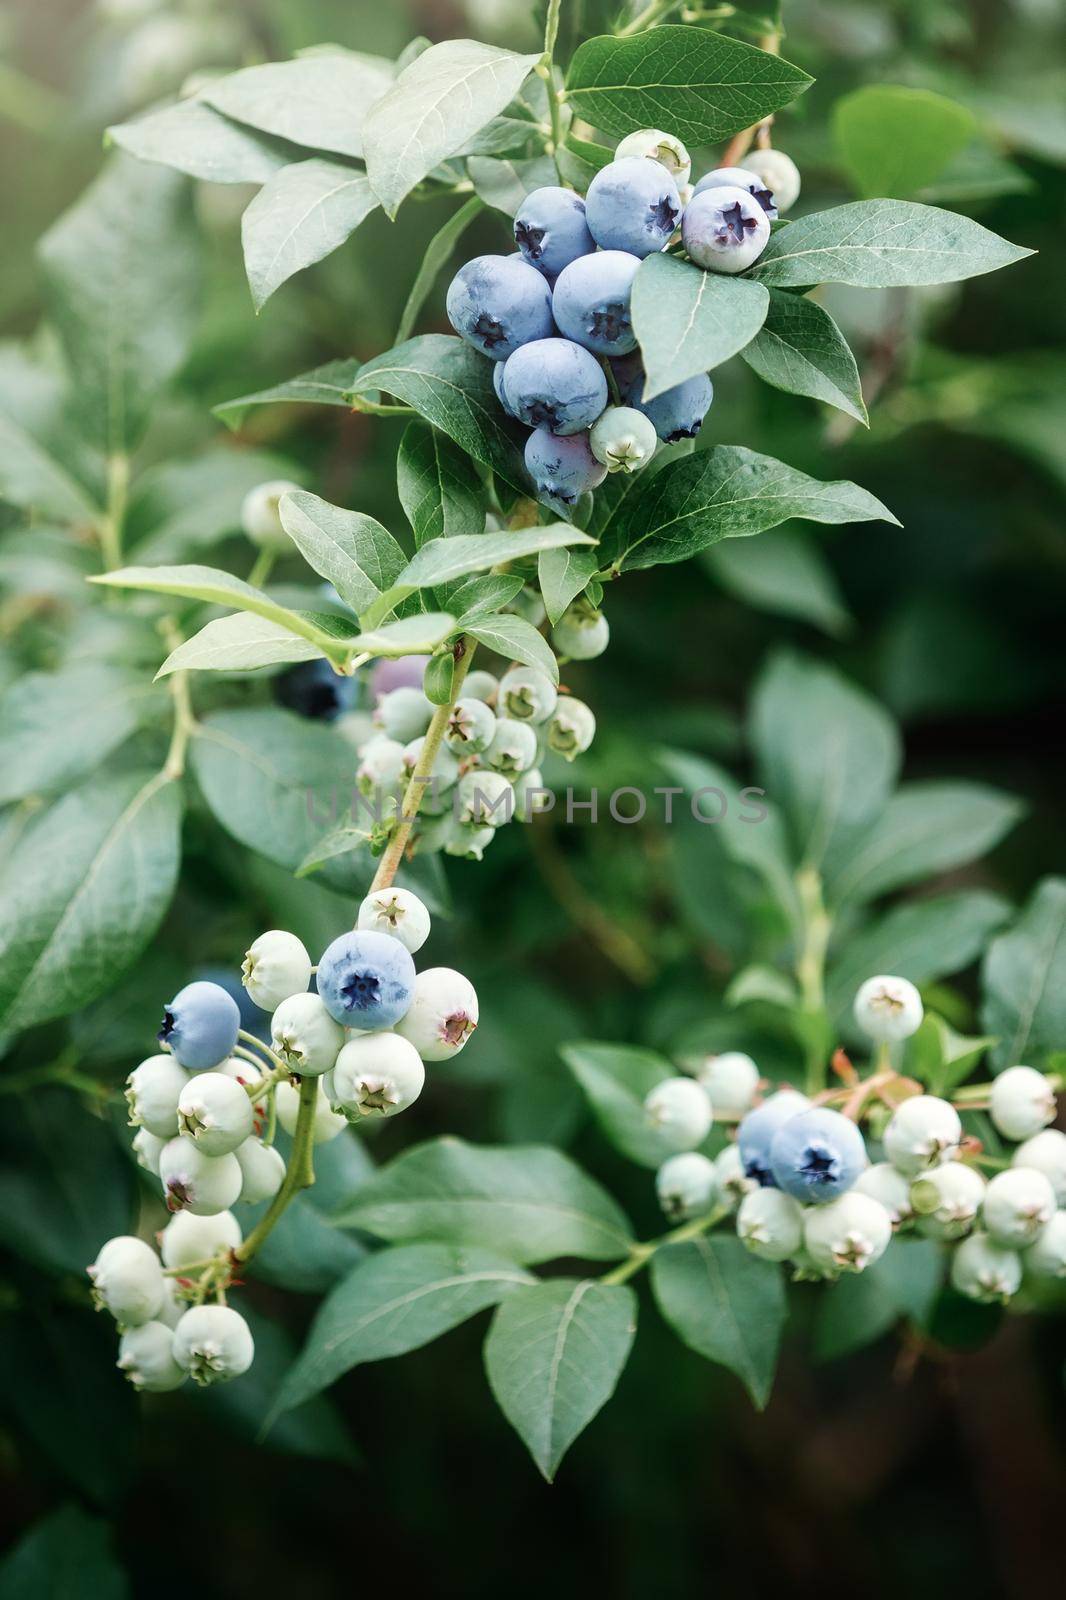 Blueberries plant, blueberries ripening on the bush. by Lincikas